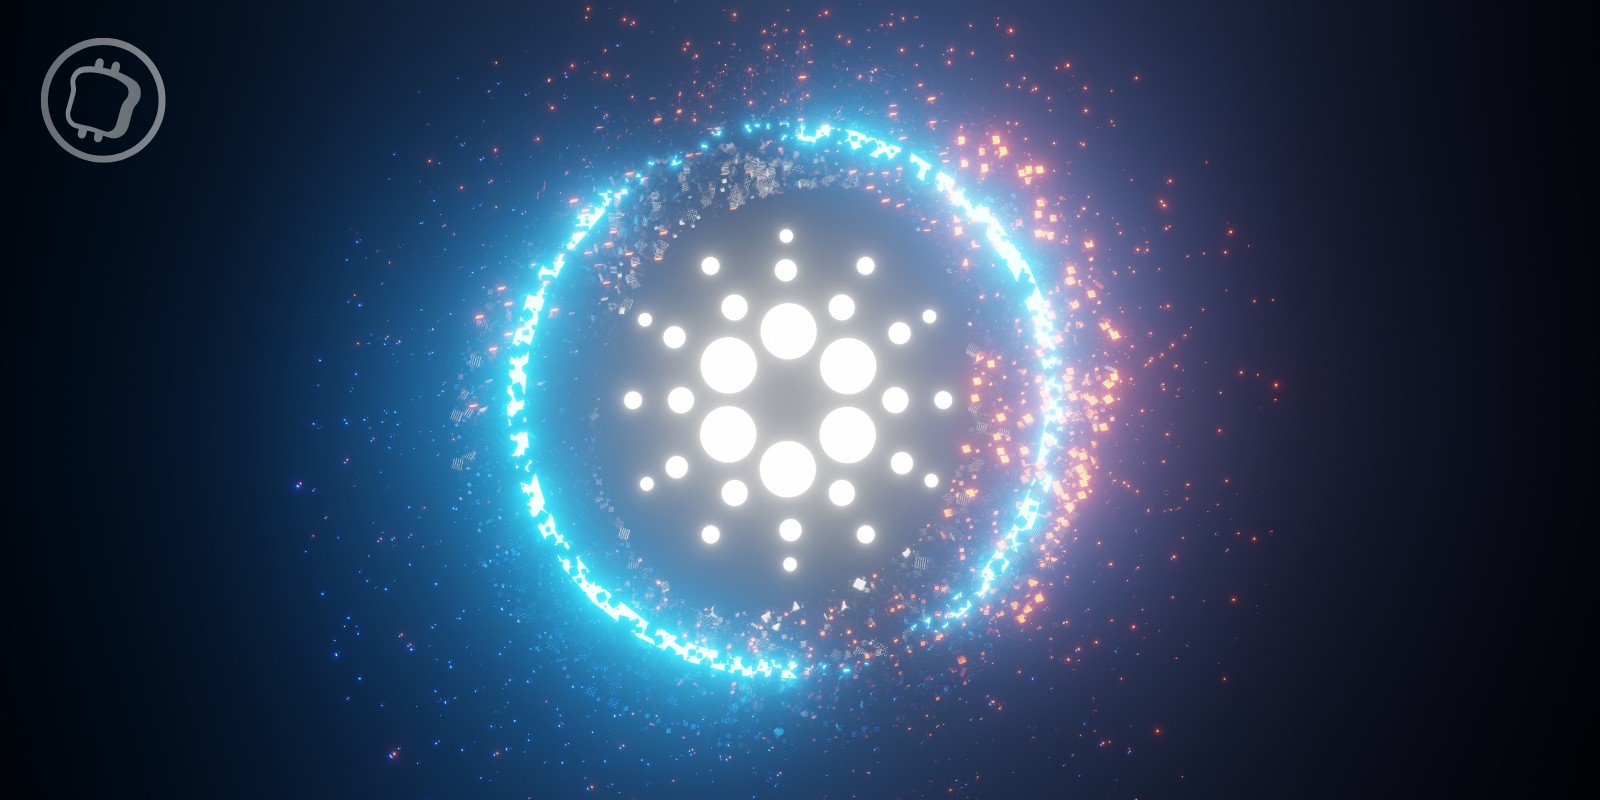 Cardano Will Soon Have a Stablecoin for the Very First Time | CoinMarketCap